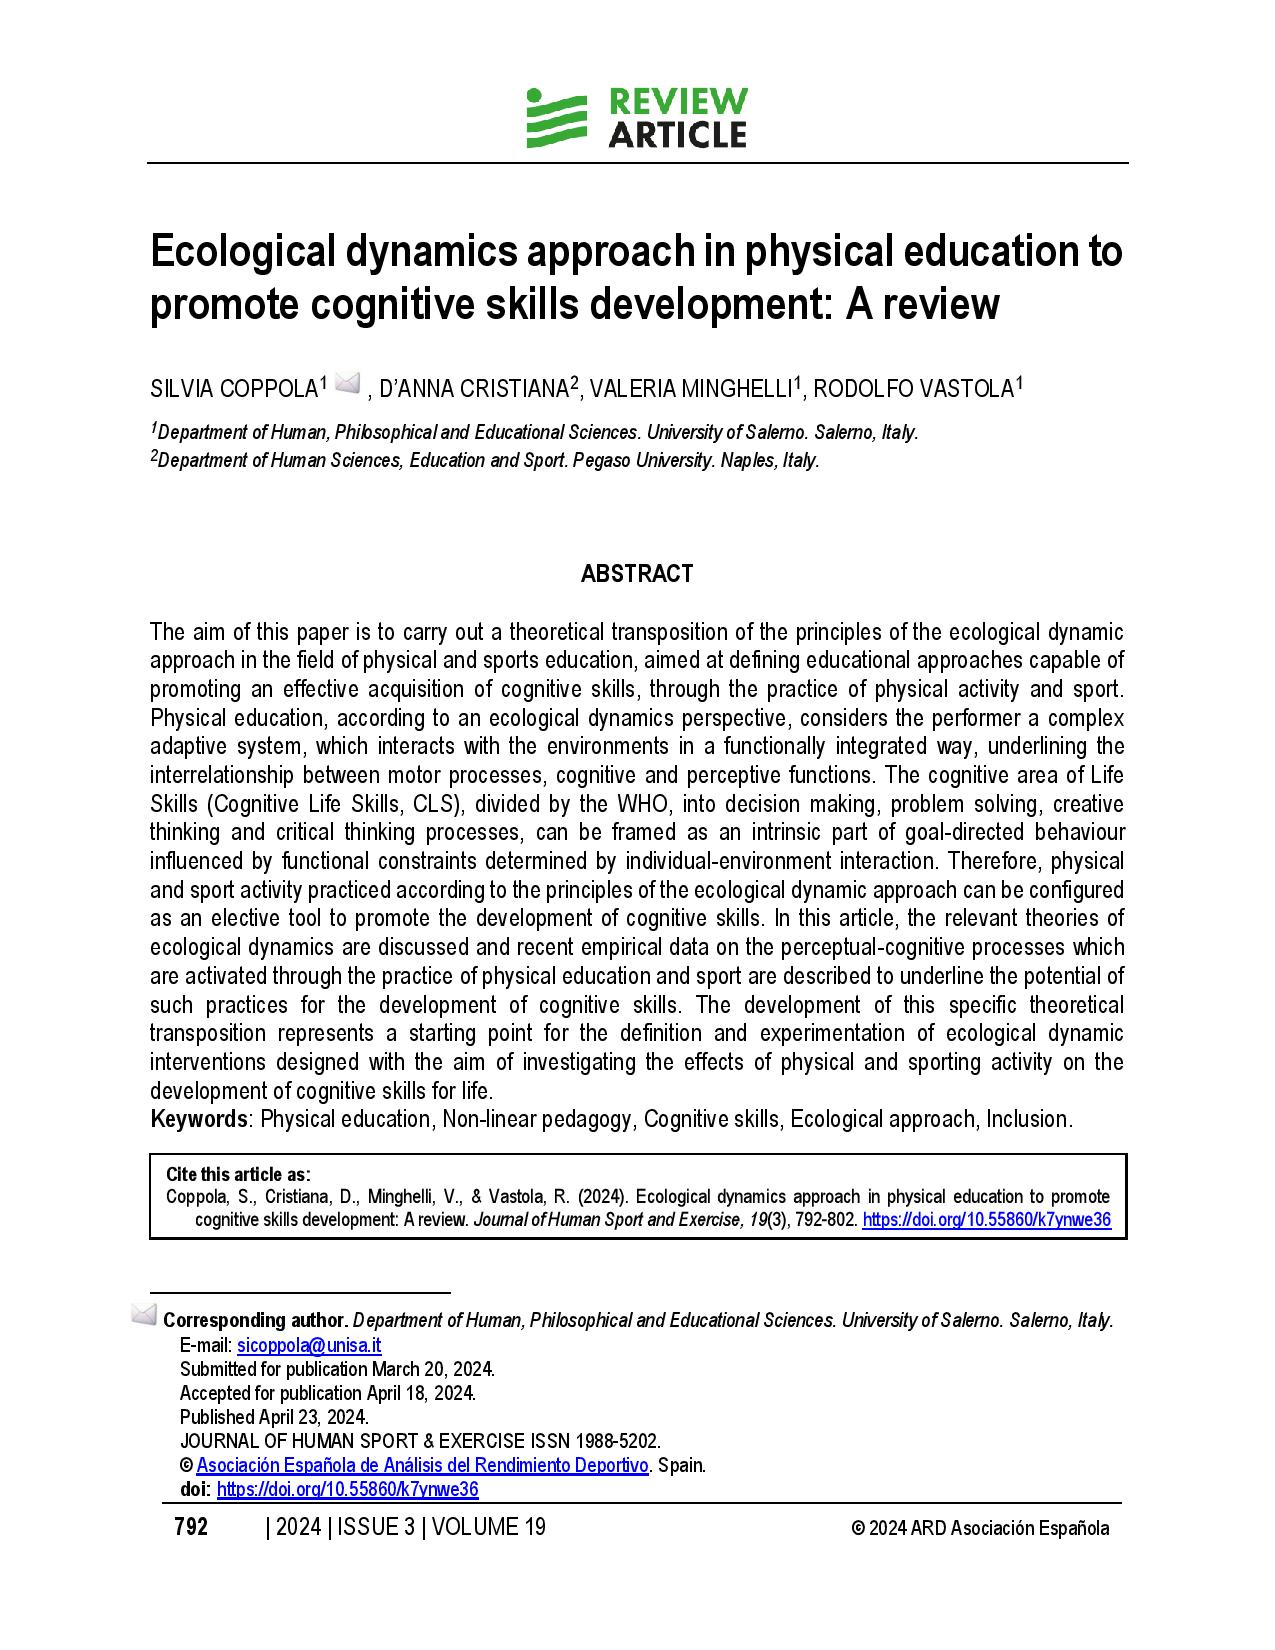 Ecological dynamics approach in physical education to promote cognitive skills development: A review